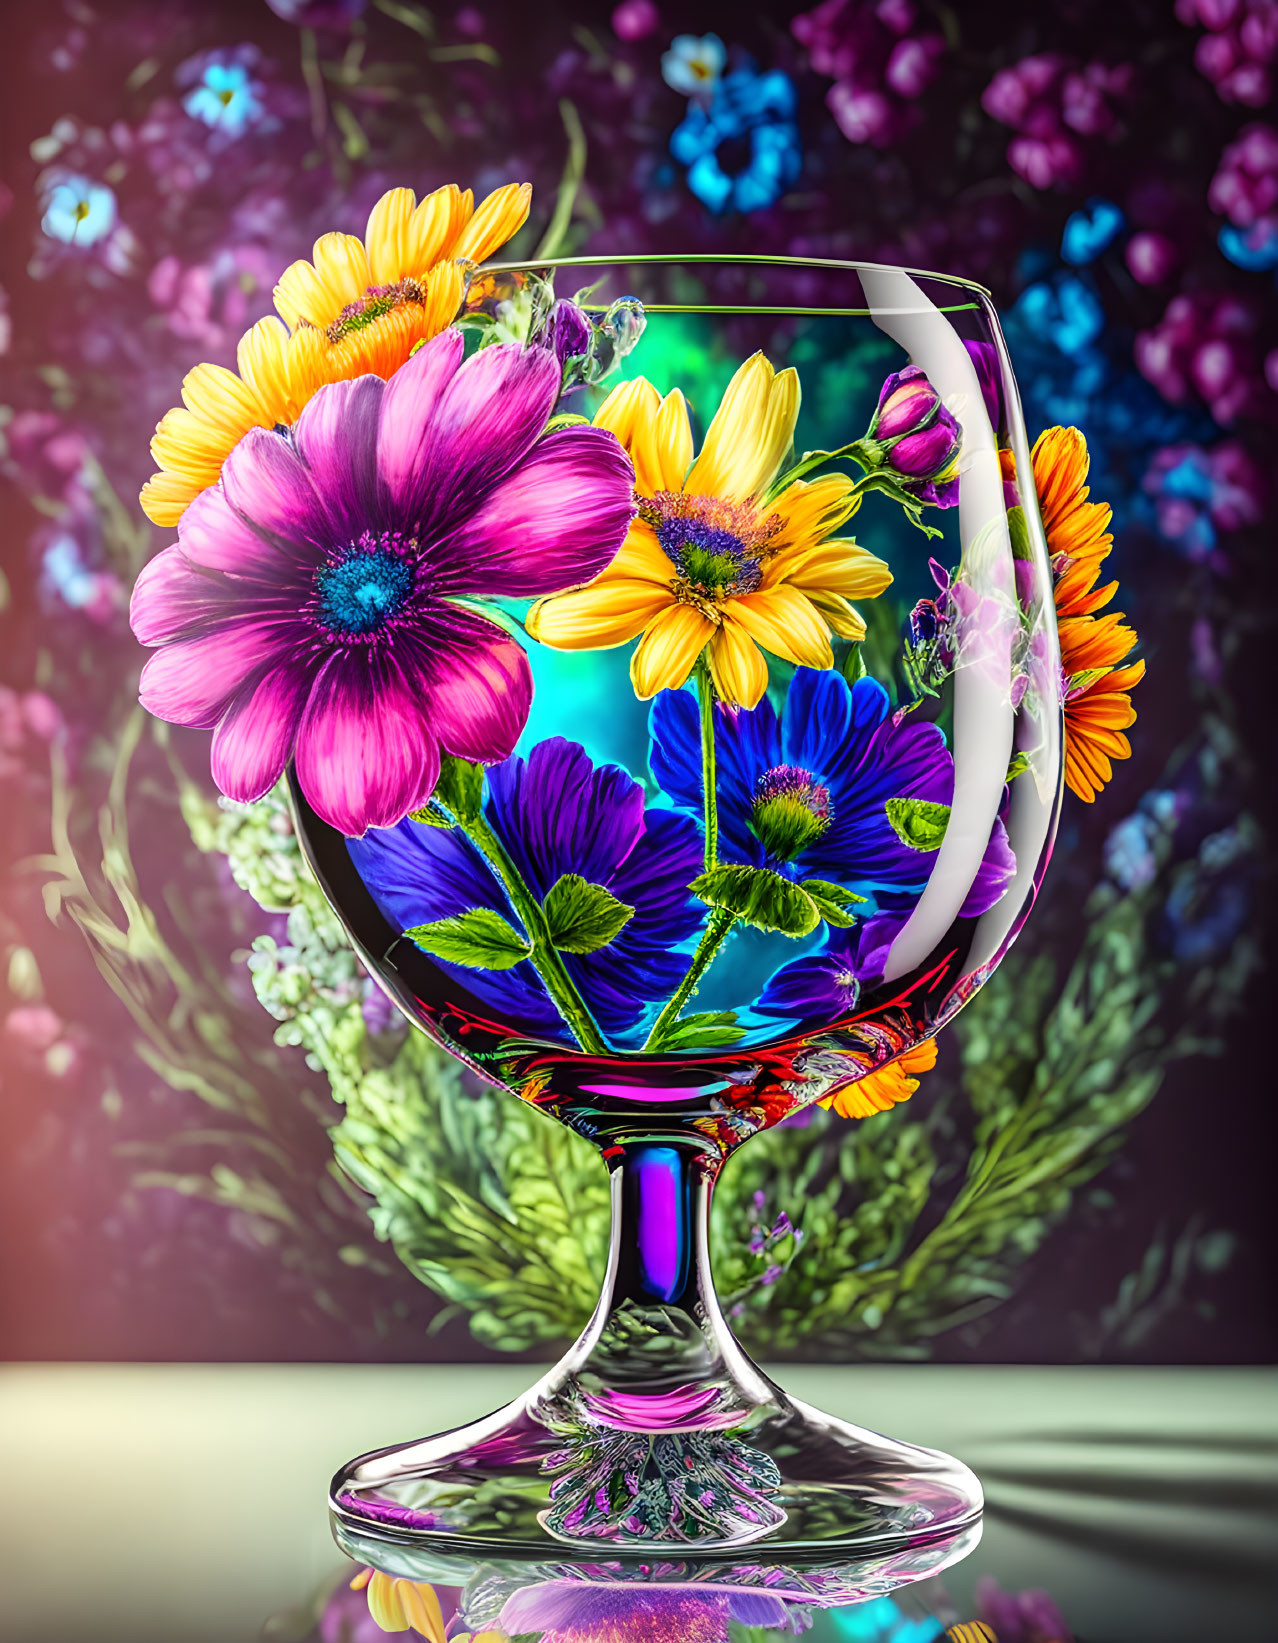 Floral Reflections in a Glass.